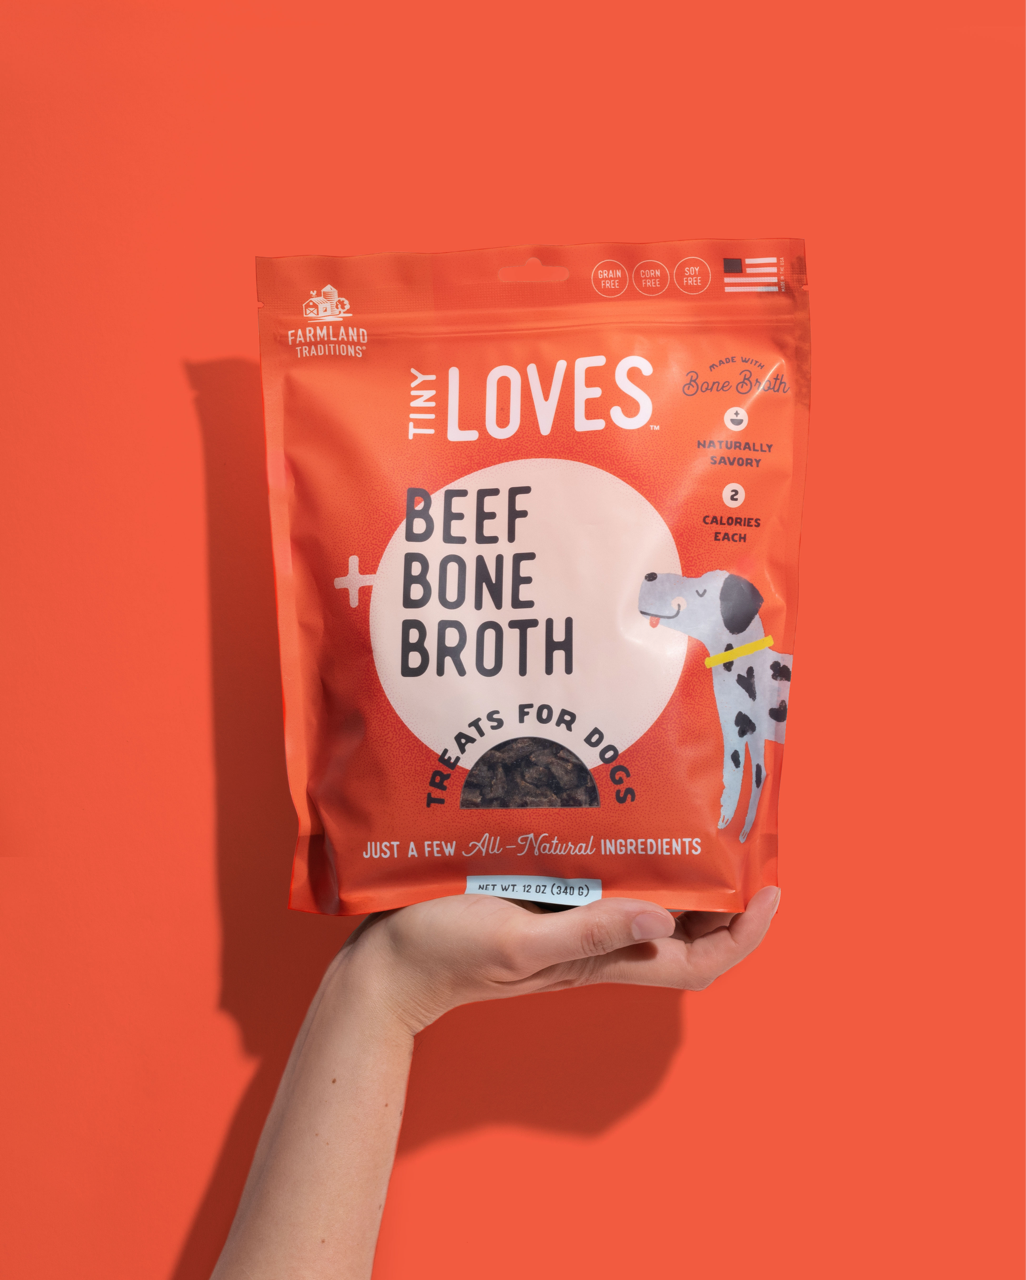 Farmland_Traditions_Beef_Bone_Broth_Dog_Treats_Tiny_Loves_Pet_Industry_Branding_Strategy_Packaging